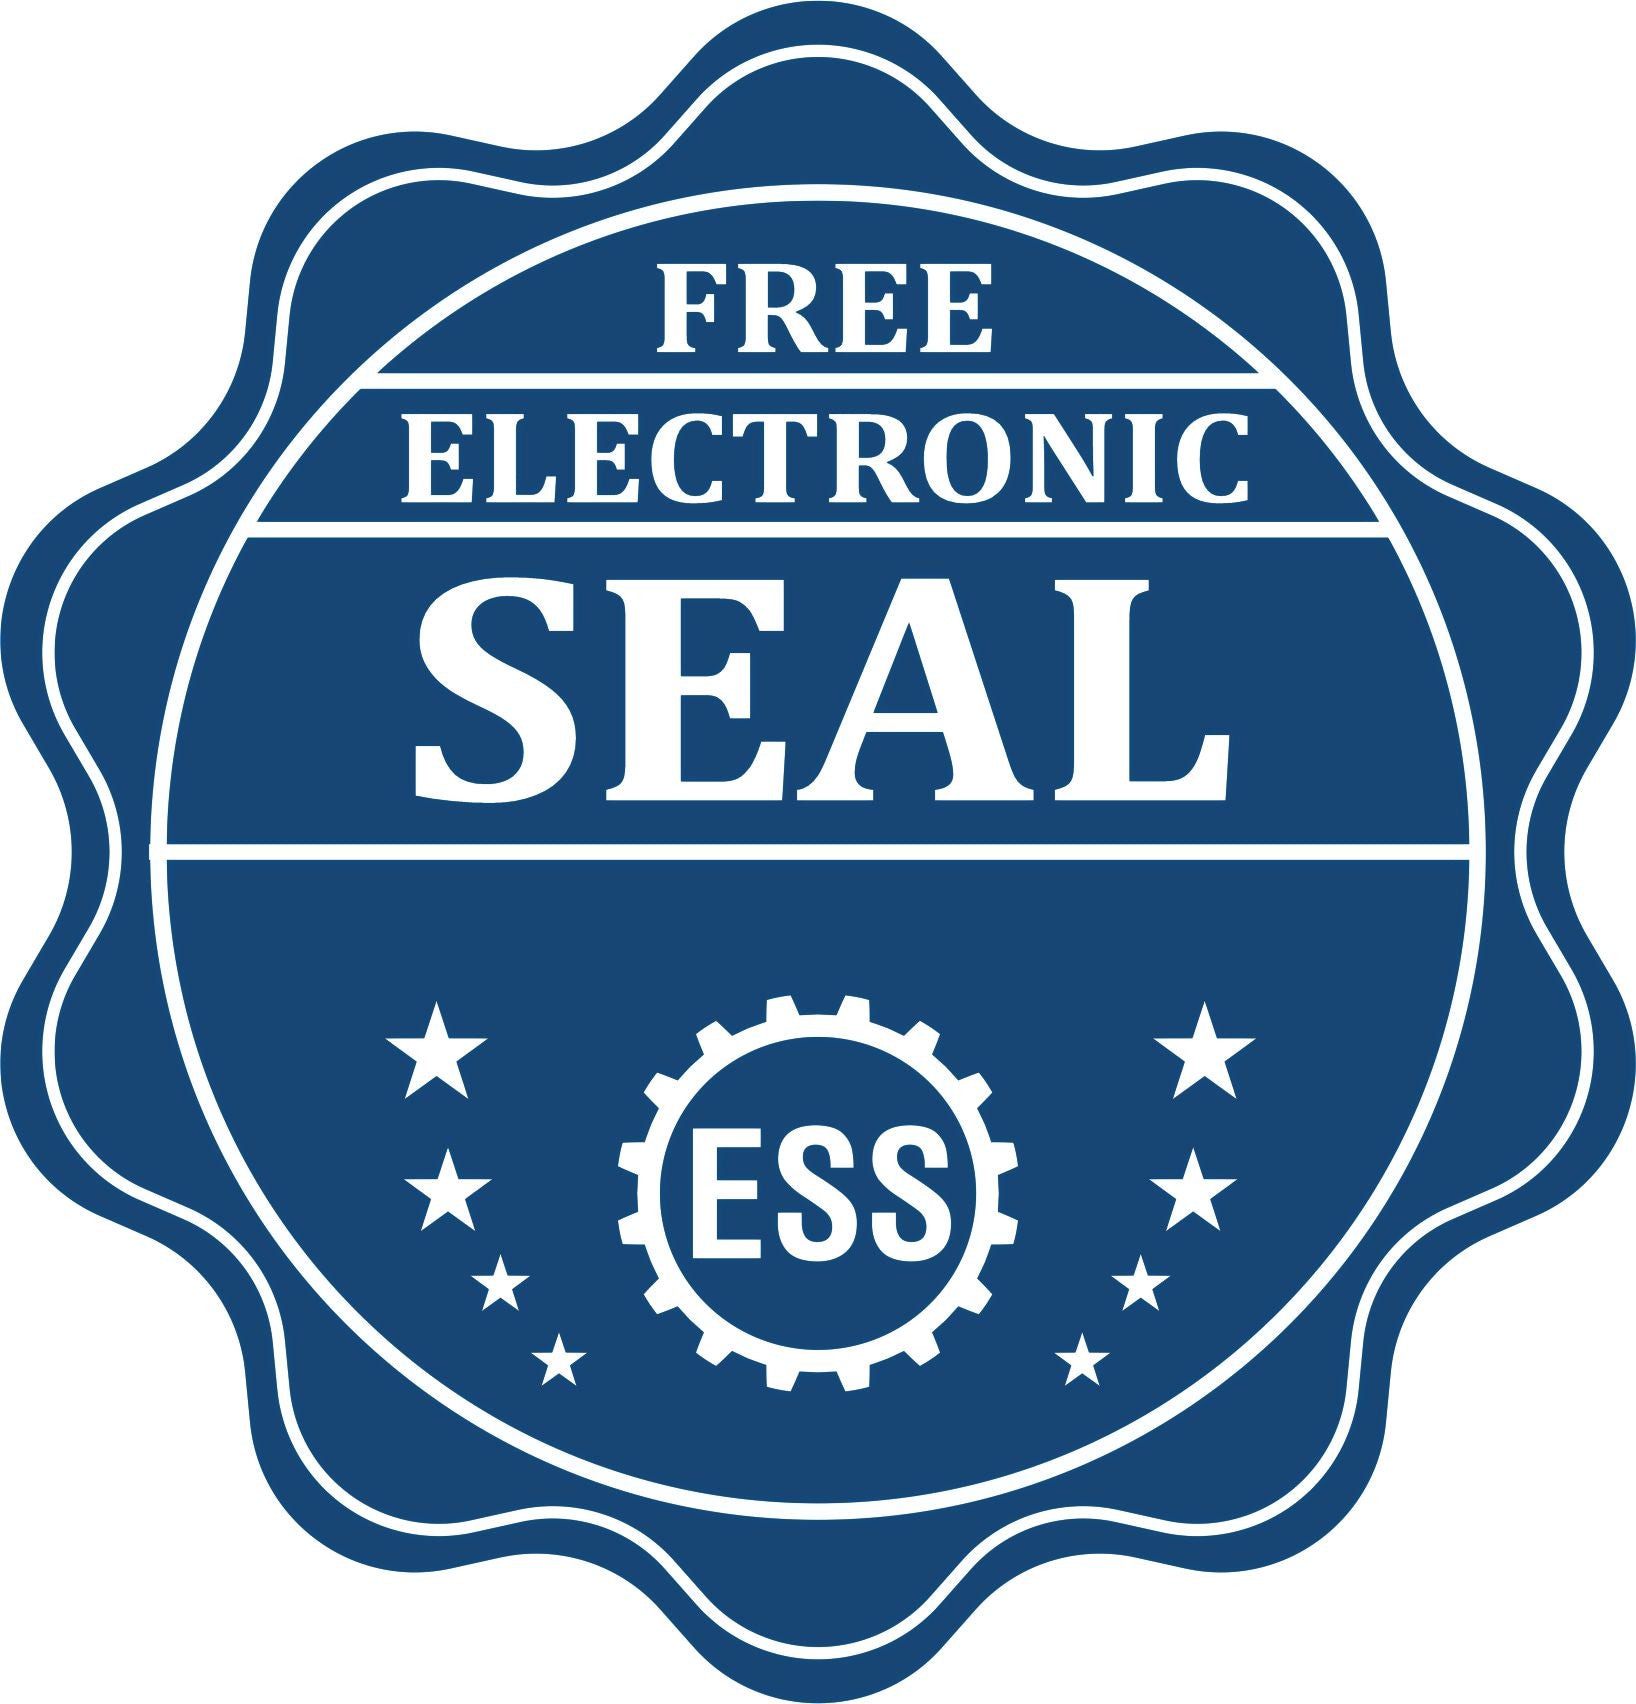 A badge showing a free electronic seal for the Gift New Mexico Geologist Seal with stars and the ESS gear on the emblem.